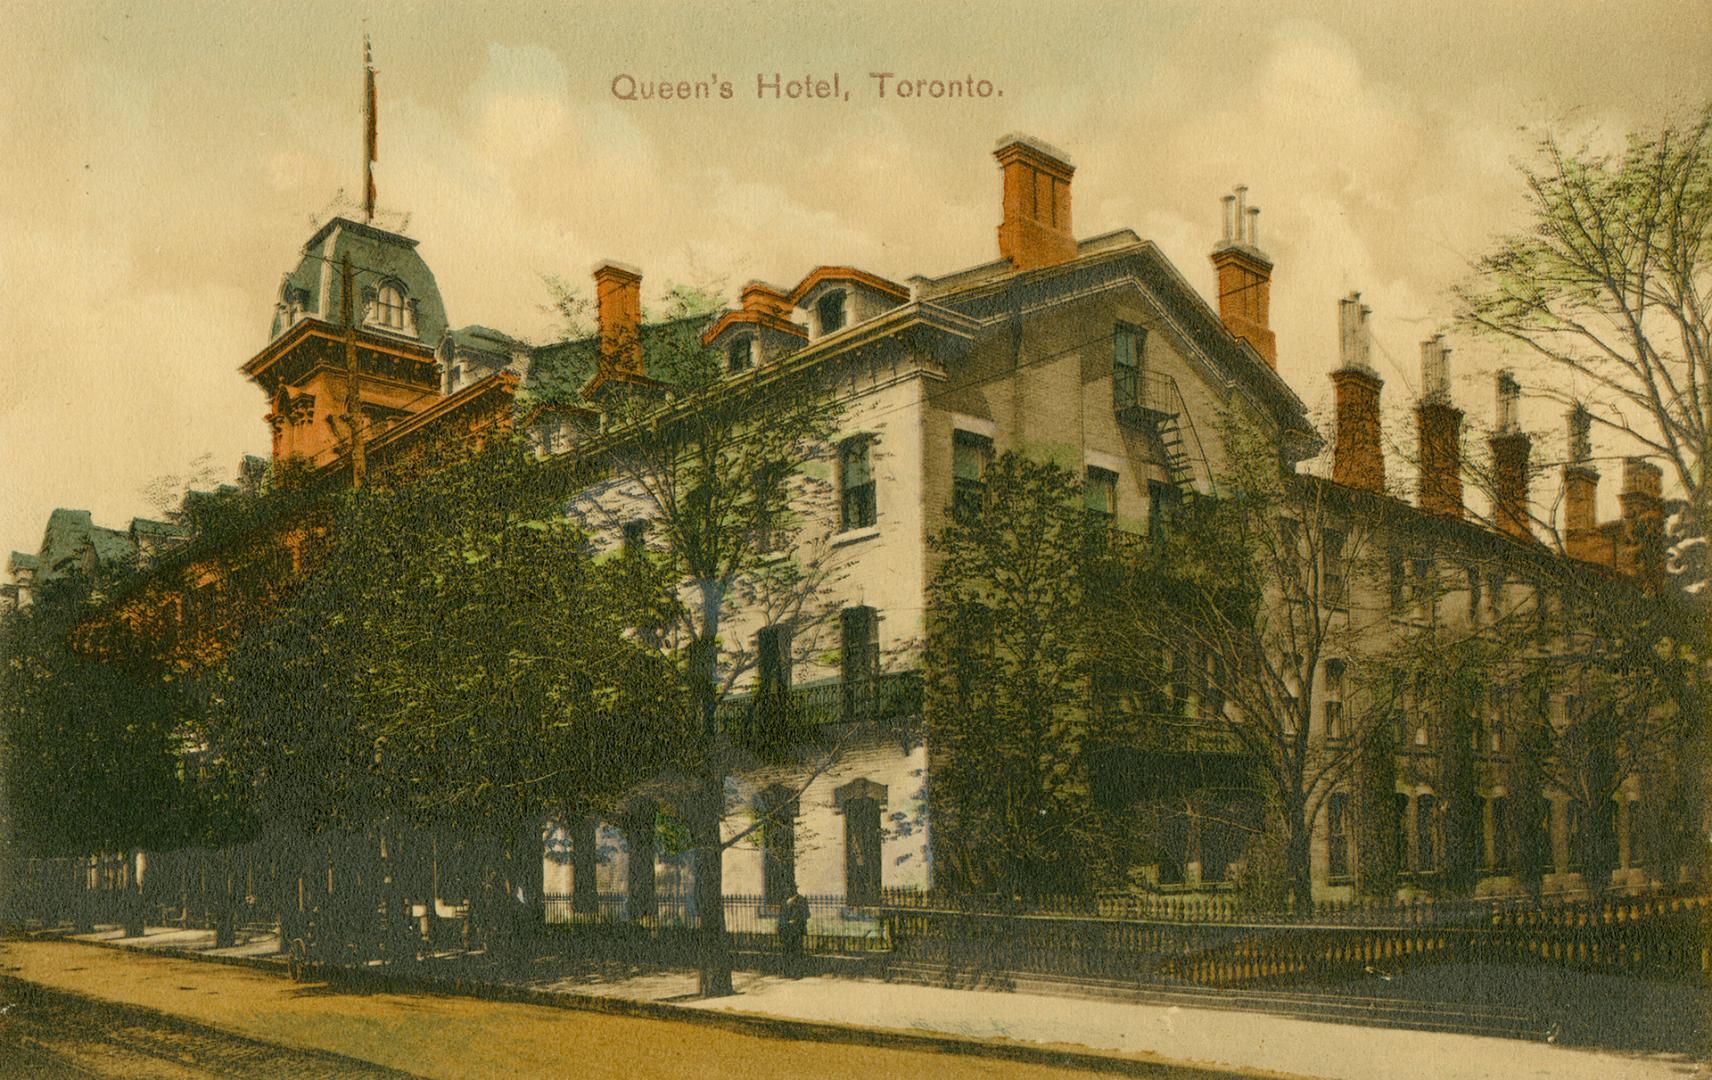 Colorized photograph of a four story hotel.